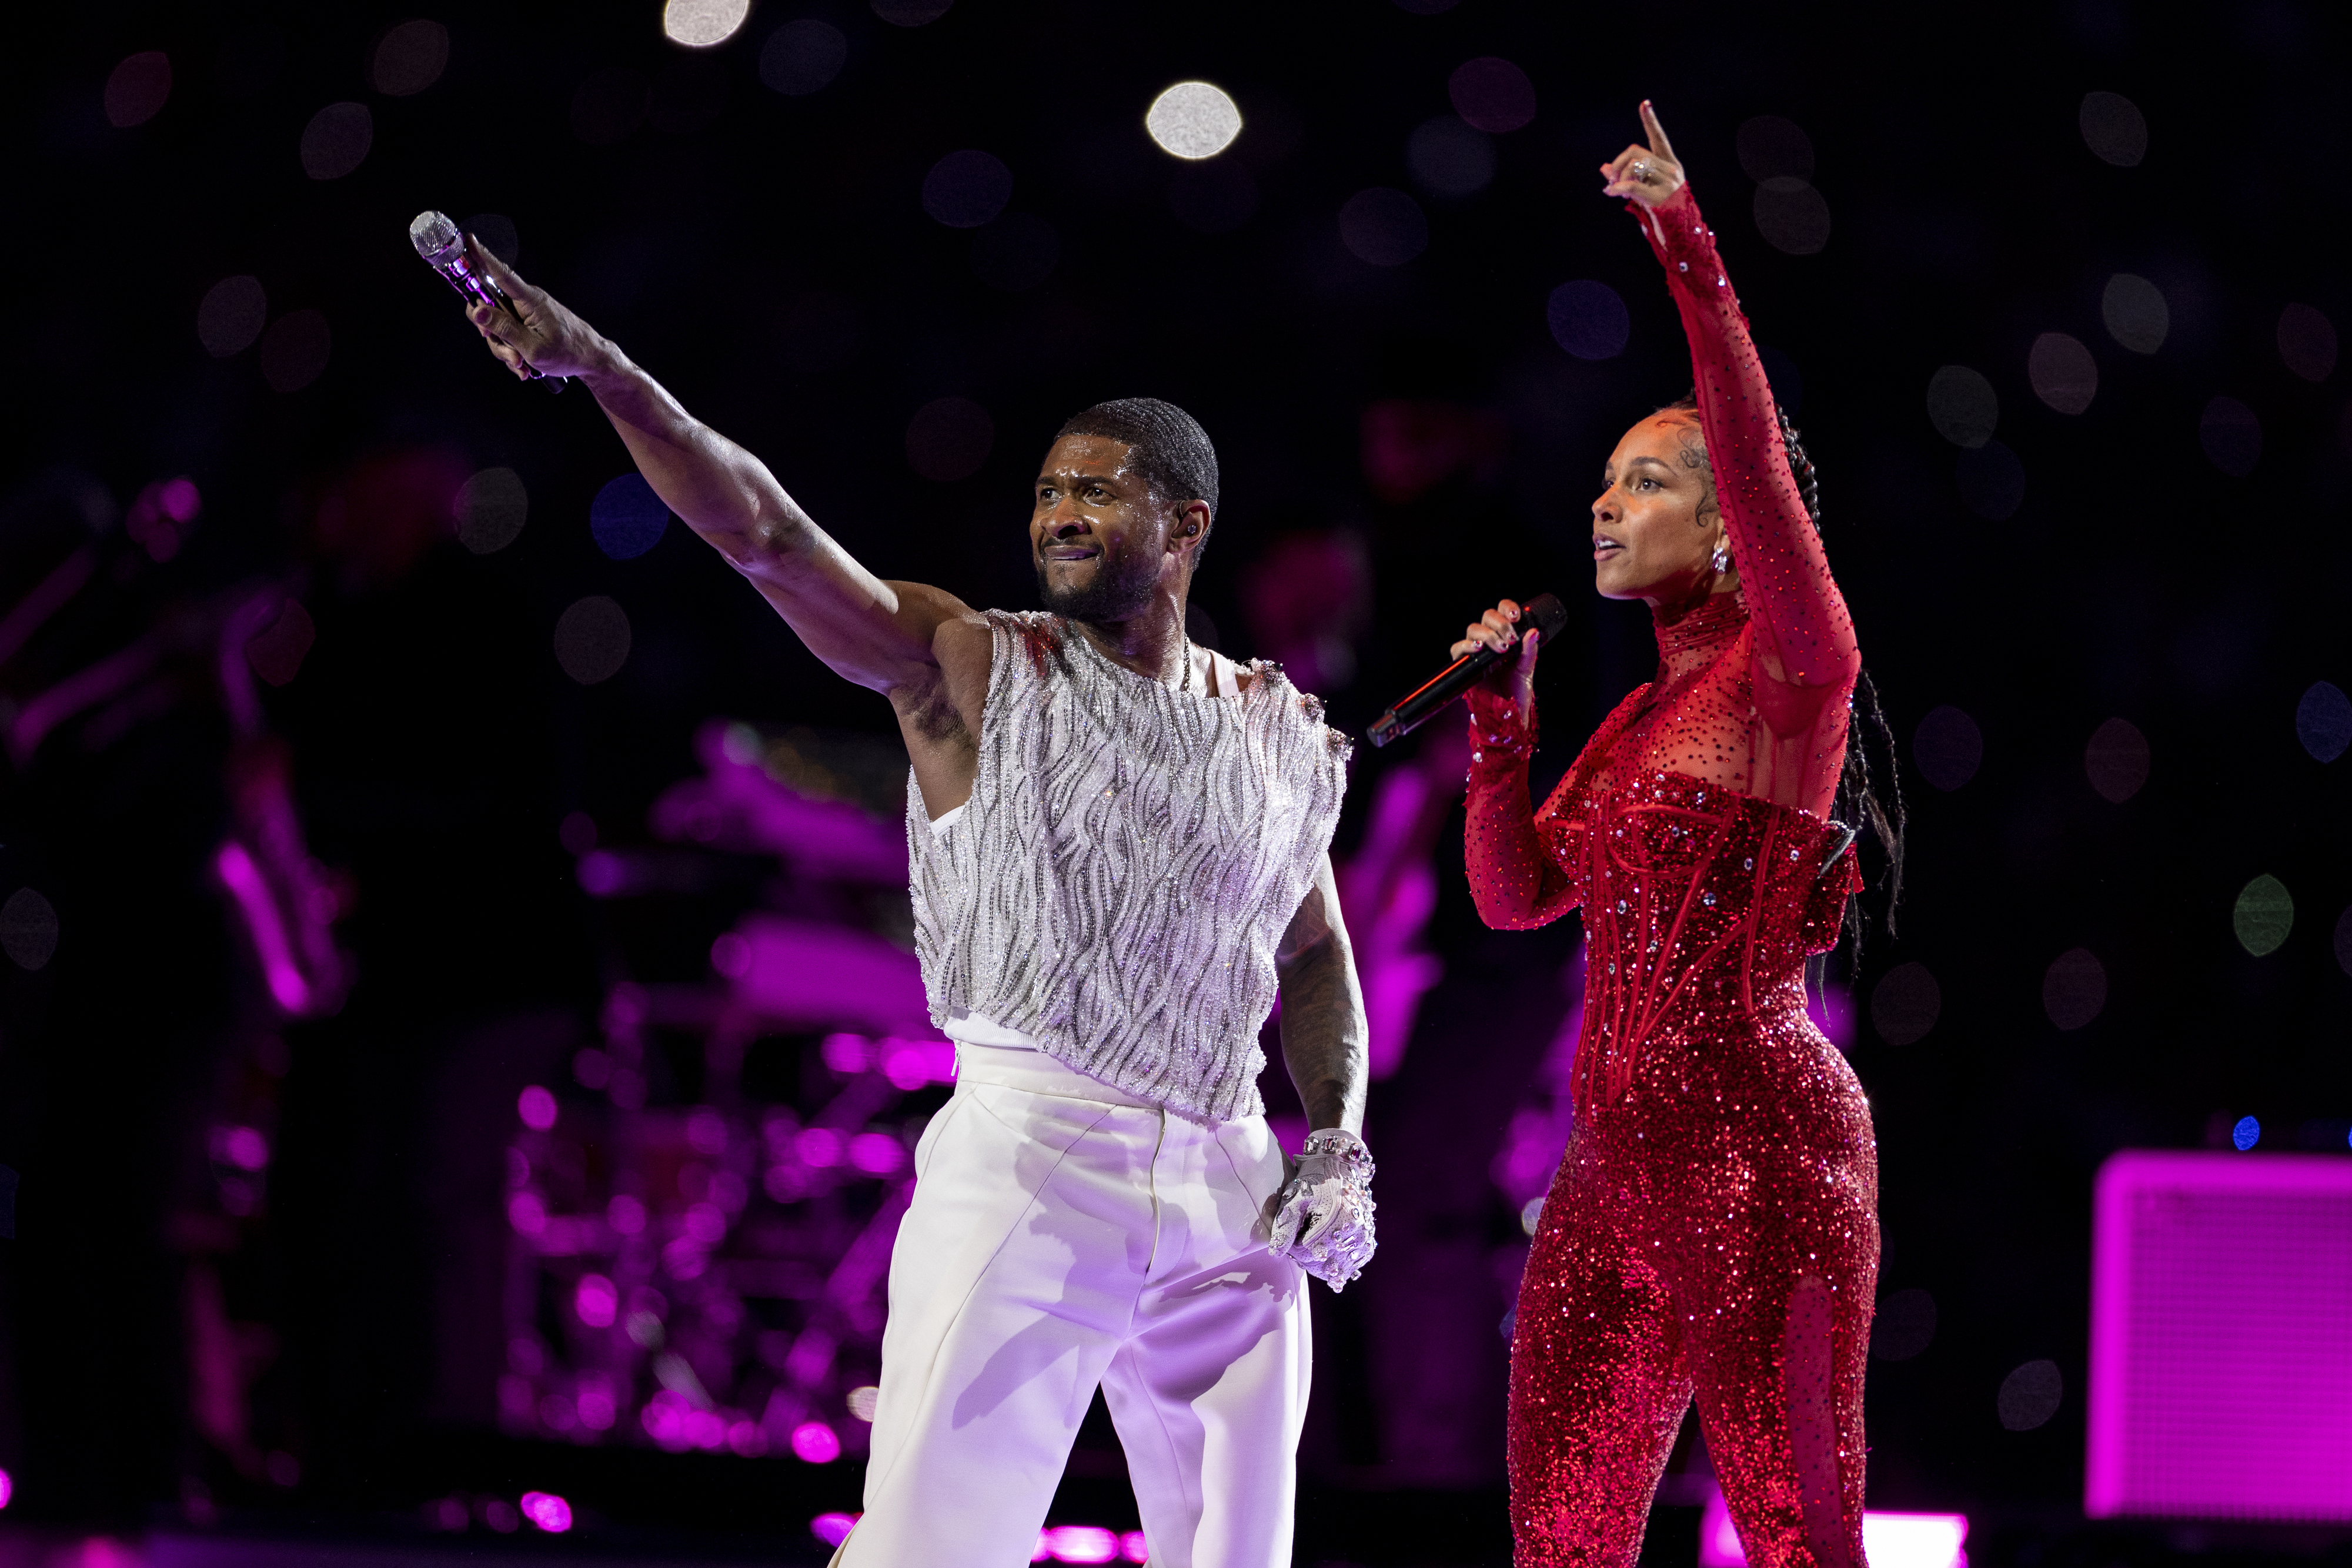 Usher and Alicia performers on stage, one in a fringed white top and white pants, the other in a sparkling red bodysuit, both with microphones